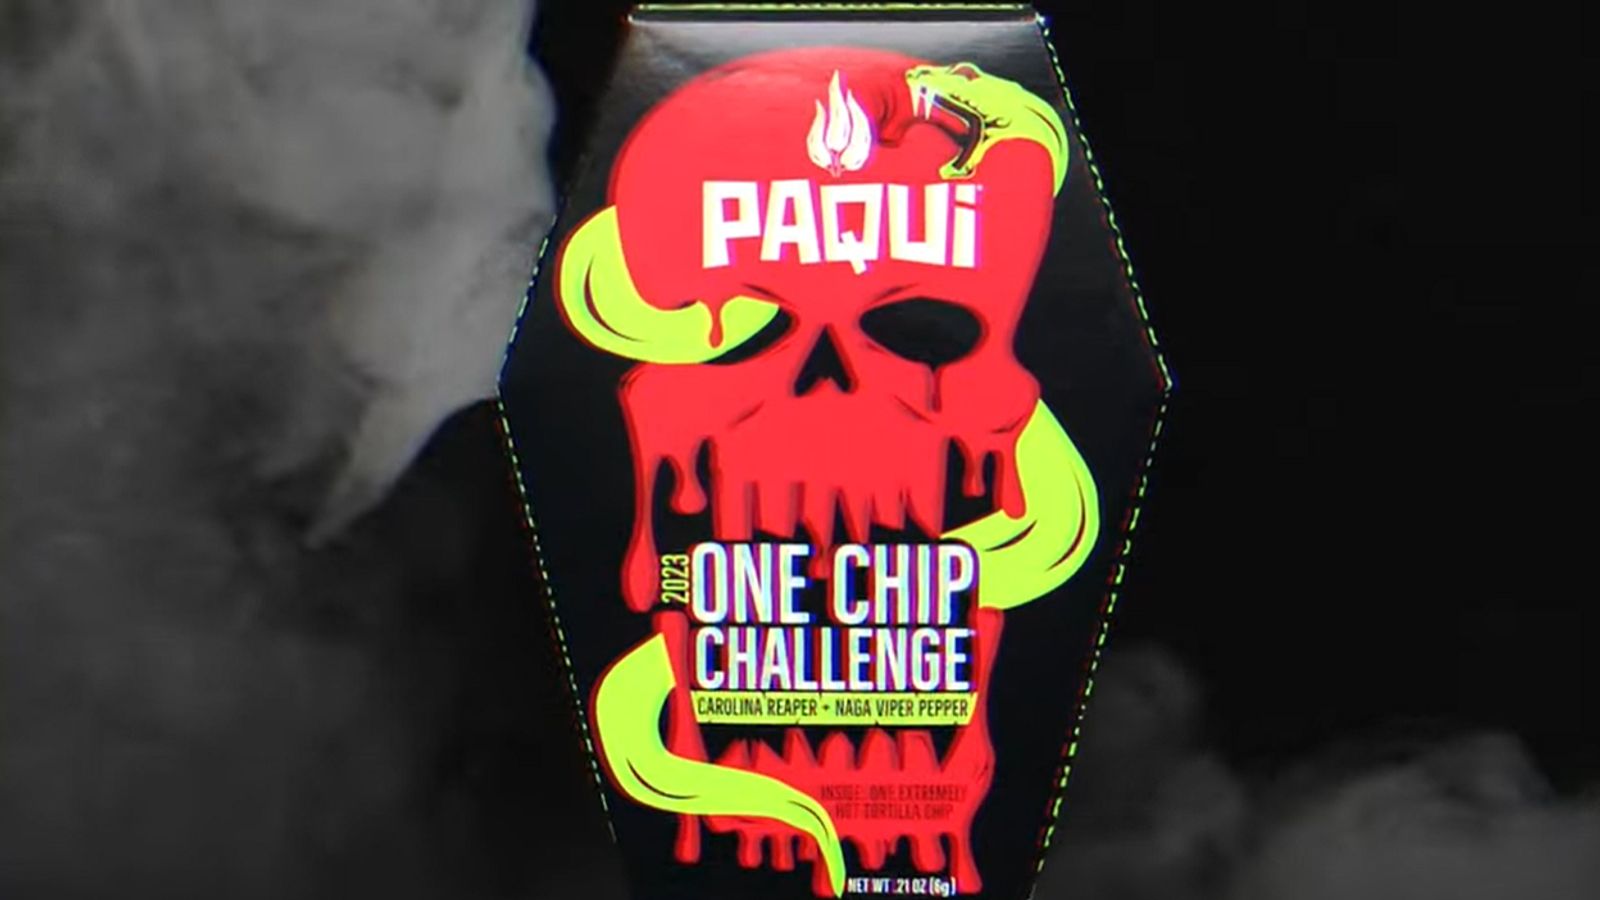 The One Chip Challenge